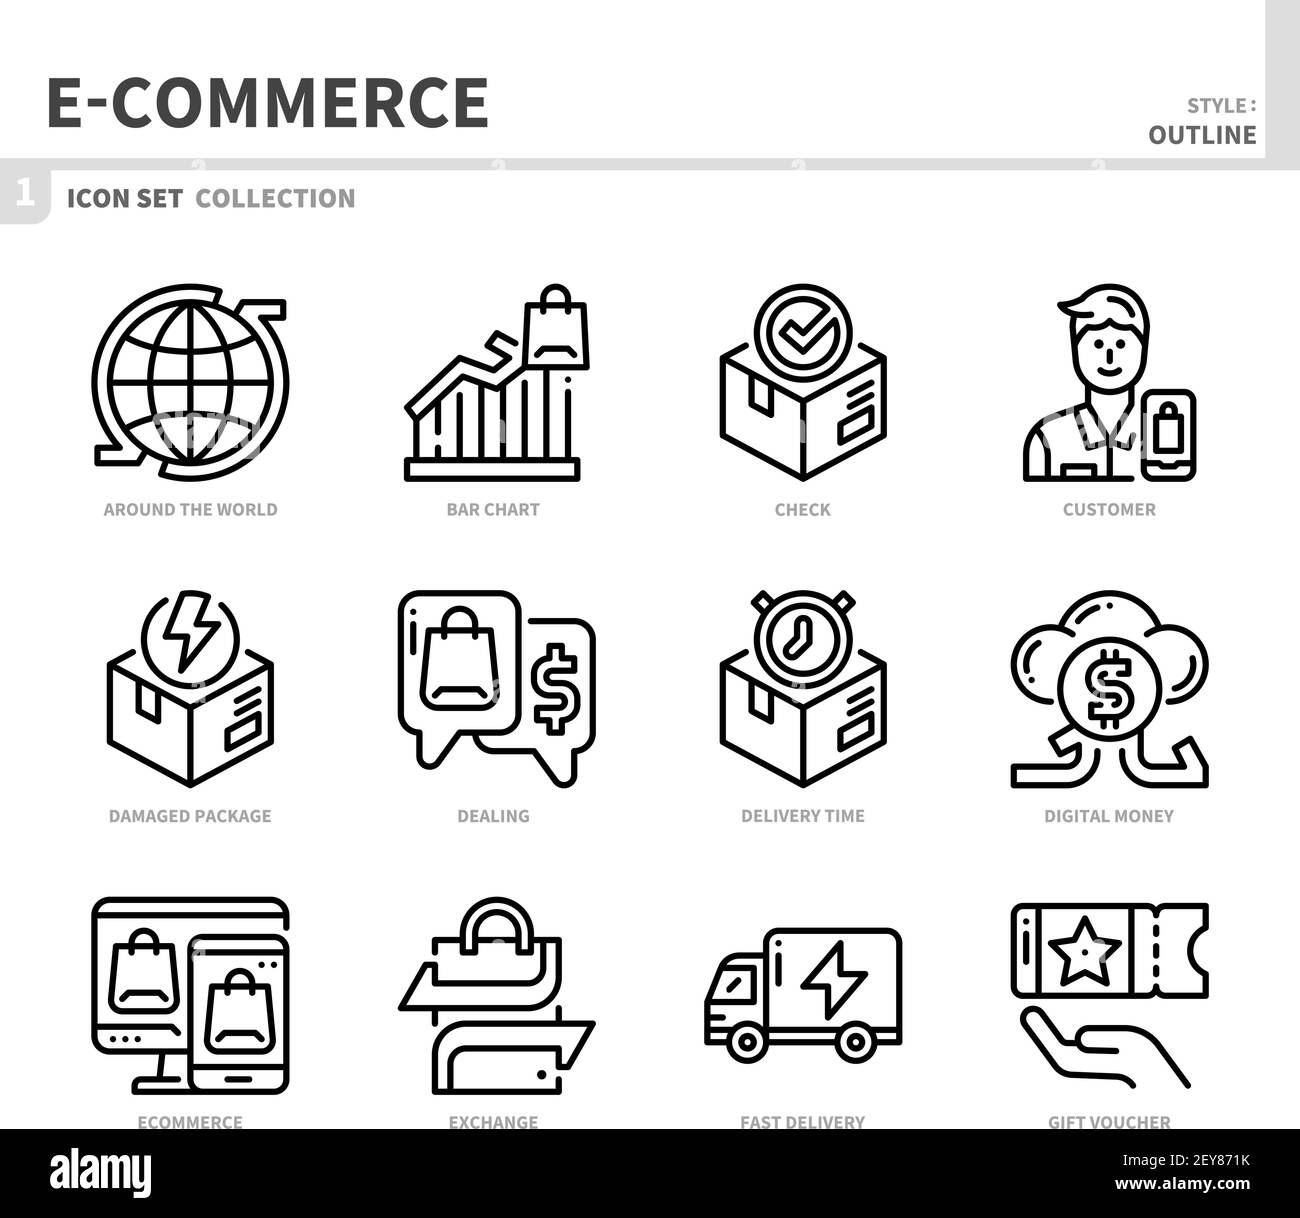 e-commerce and online shopping icon set,outline style,vector and illustration Stock Vector